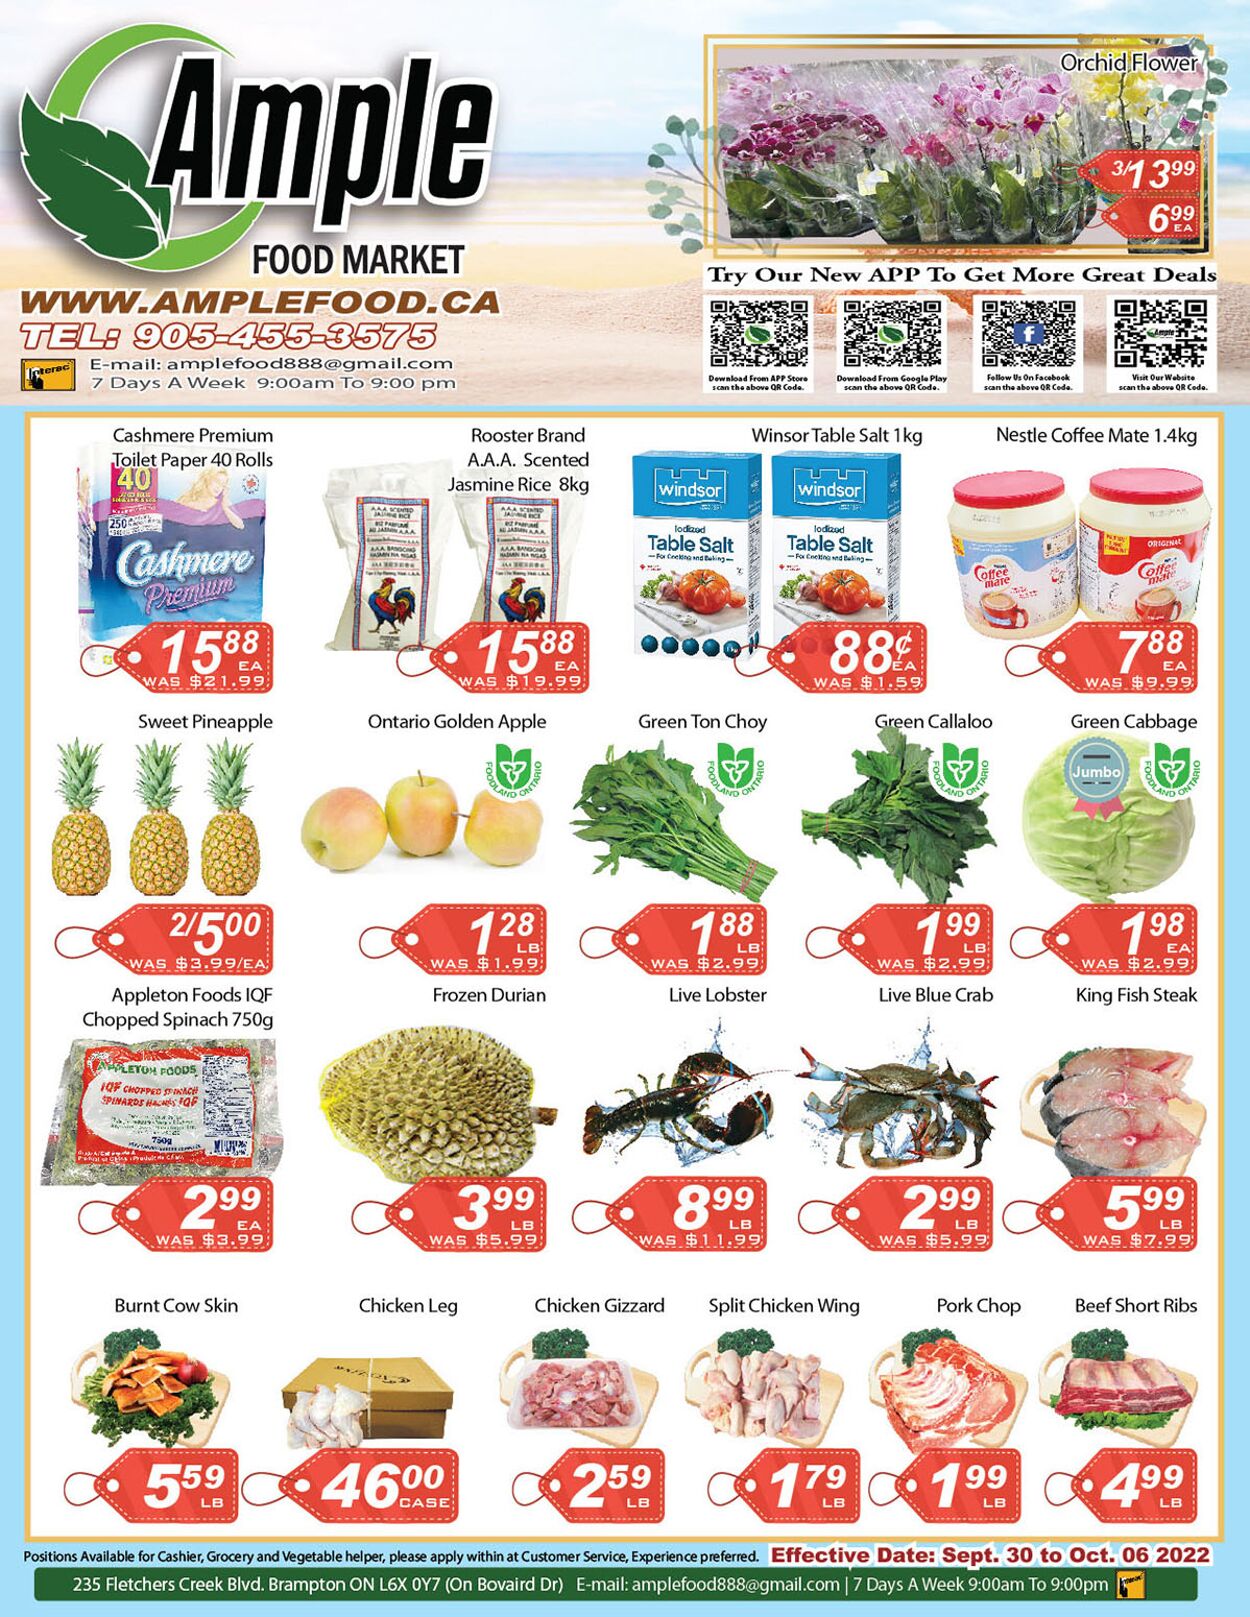 Ample Food Market Promotional flyers